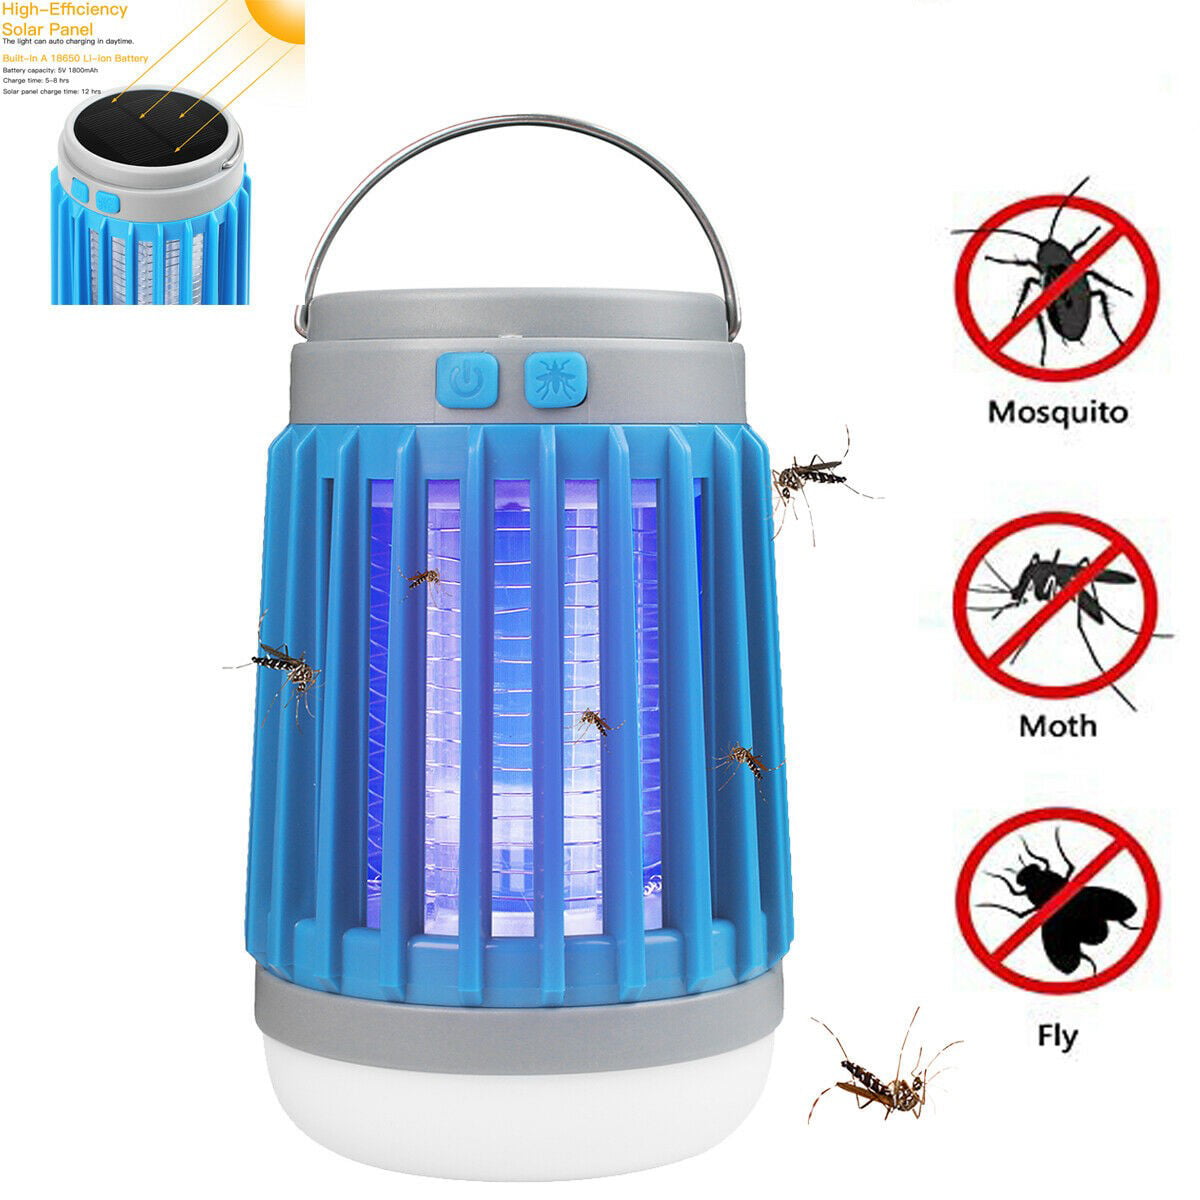 Bosunny Mosquito Killer Camping Mosquito Tent Light 2 in 1 Electronic Insect Killer IPX4 Waterproof and USB Rechargeable Bug Zapper Light for Indoor and Outdoor Emergency Situations